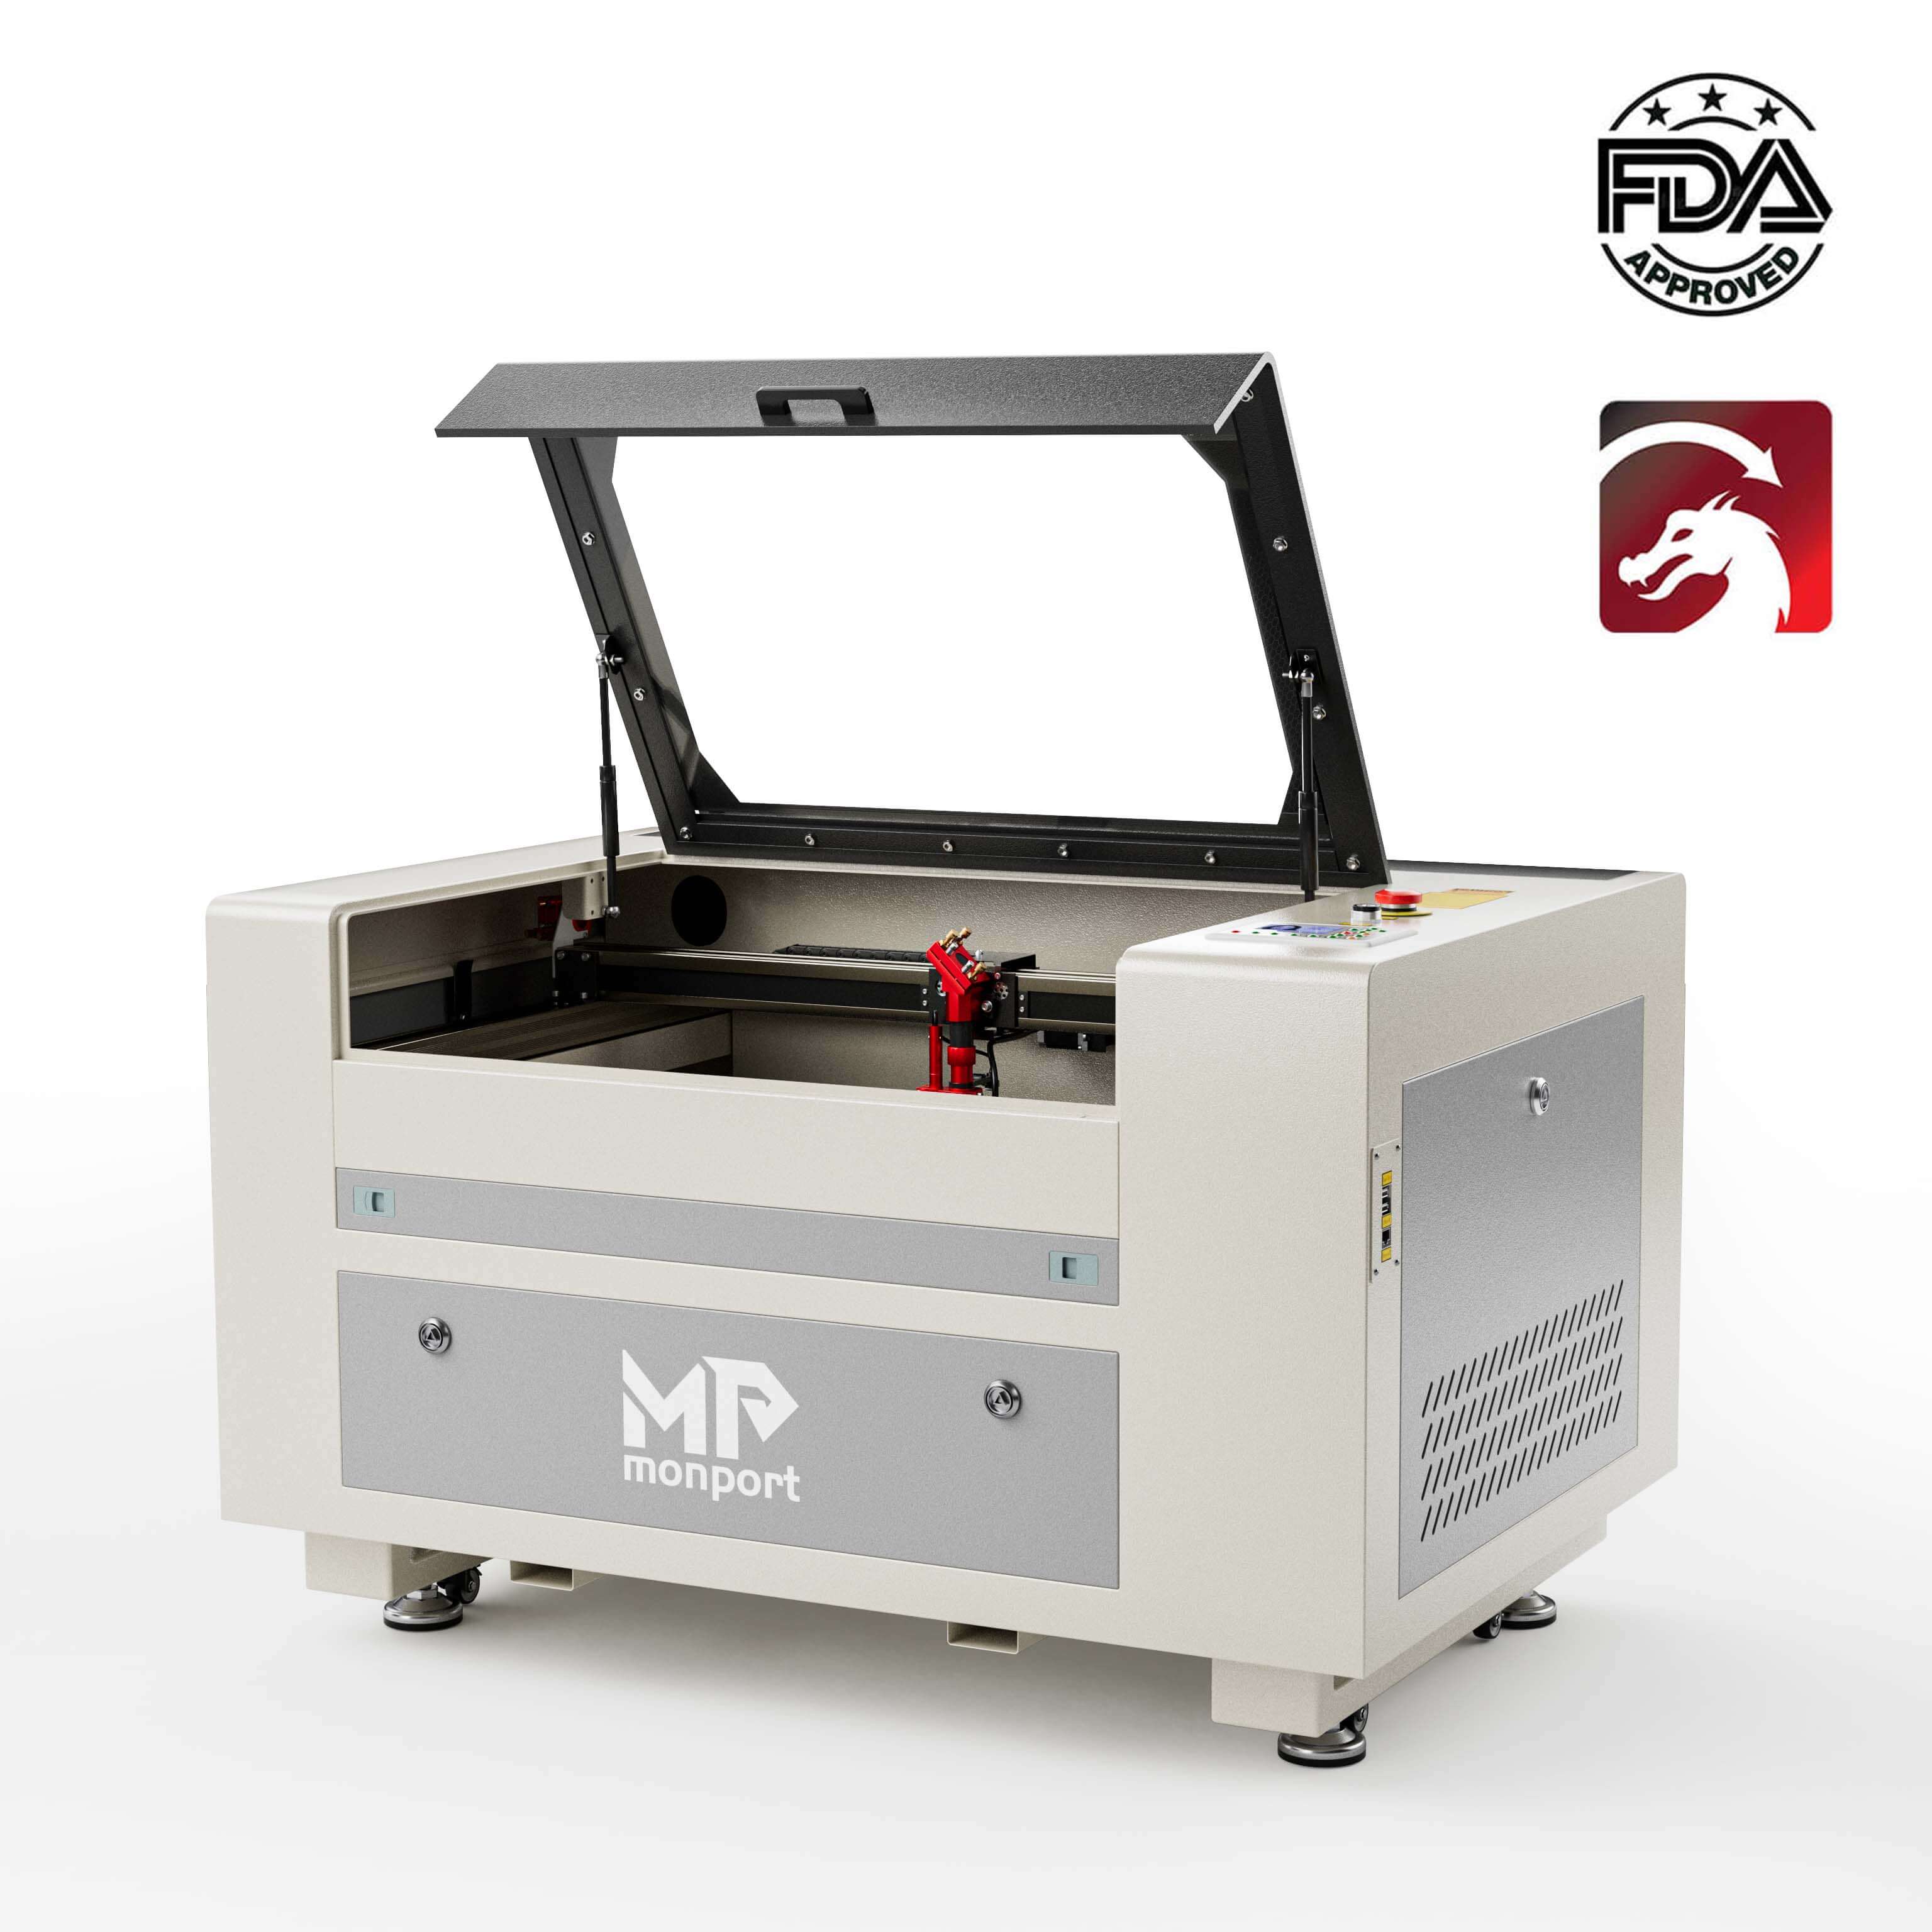 70W CO2 Laser Engraver Cutting Machine with 16” x 30” Working Area